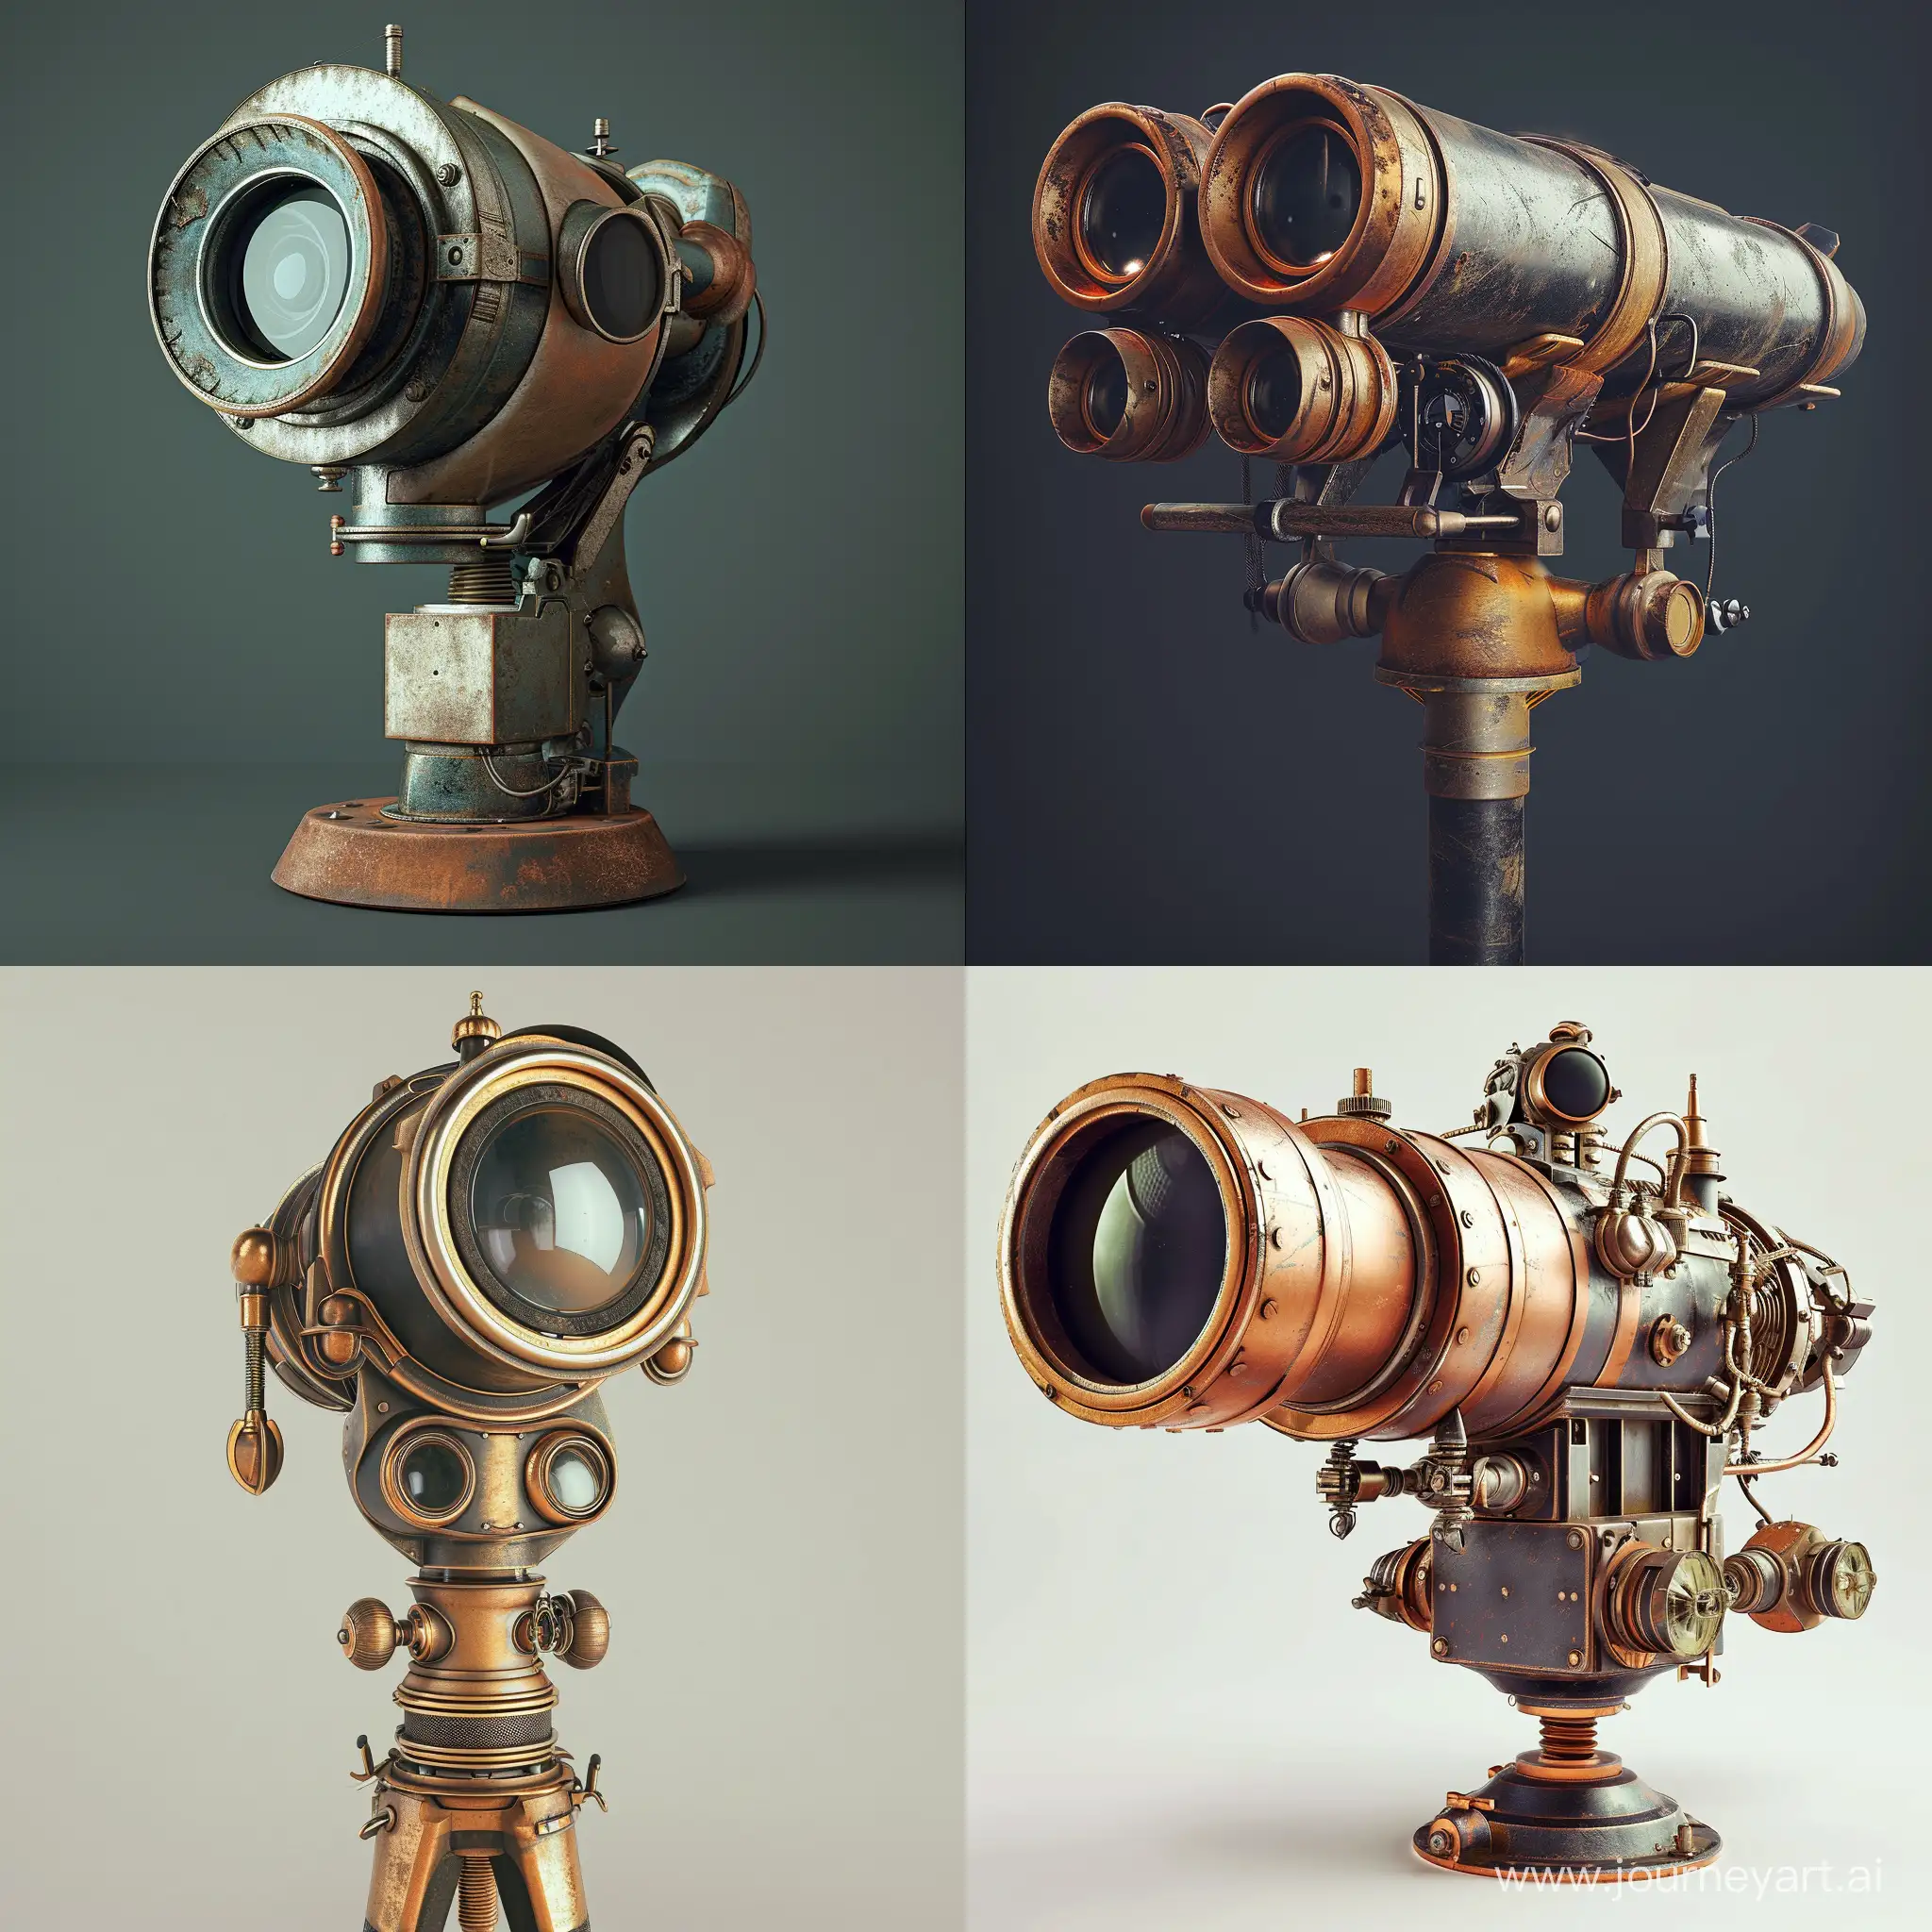 Detailed-Vintage-Periscope-Art-with-Epic-Composition